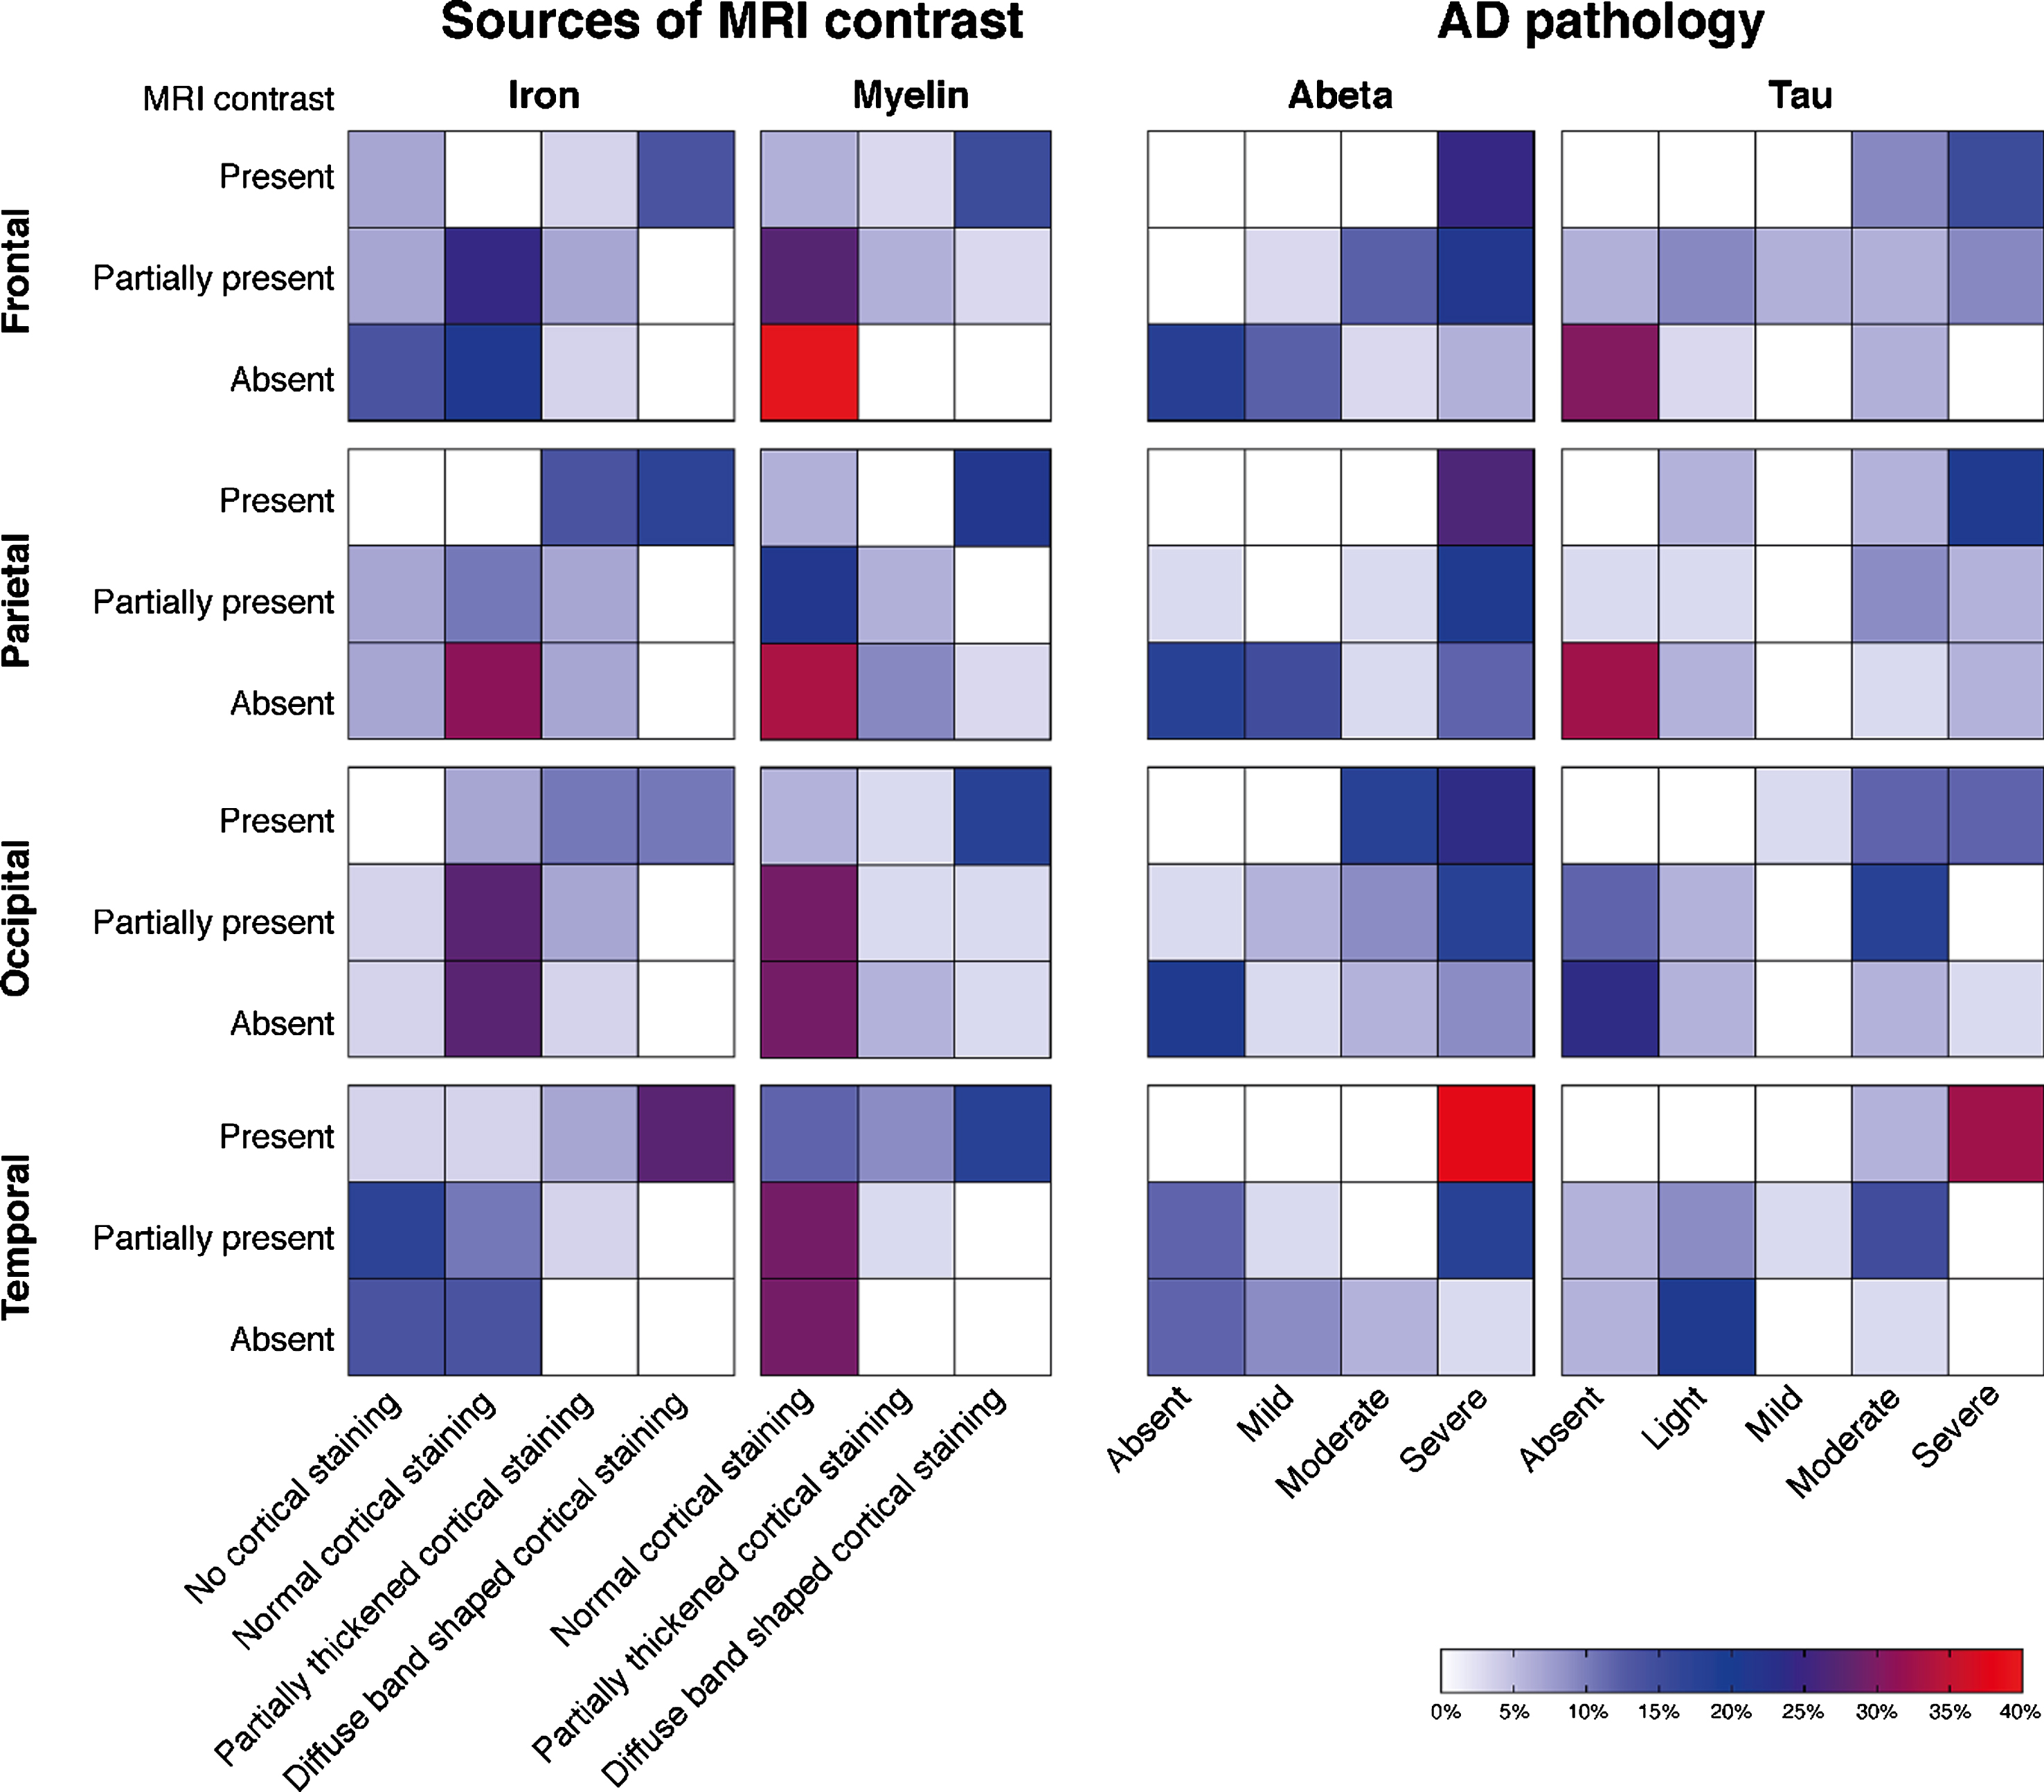 Heatmaps of the correlation between MRI contrast changes and AD pathology severity. Each individual square represents the percentage of cases. Each group of squares, for example the first group of squares in the upper left corner (i.e., MRI contrast versus changes in cortical iron accumulation in the frontal cortex), represents the correlation between the MRI scores and the histological scores. A positive correlation within each group of squares is observed as a flow of colored squares from the lower left corner towards the upper right corner. The presence of a diffuse hypointense band on MRI was significantly correlated with the semi-quantitative scored amount of cortical iron accumulation, cortical myelin changes, Aβ plaque load, and tau load in all cortical regions (p < 0.05). In our cohort, a diffuse hypointense band on MRI was always accompanied by moderate-to-high amounts of Aβ plaques and light-to-severe tau load. In subjects without a diffuse hypointense band on MRI, mostly absent-to-low amounts of hyperphosphorylated tau were found.